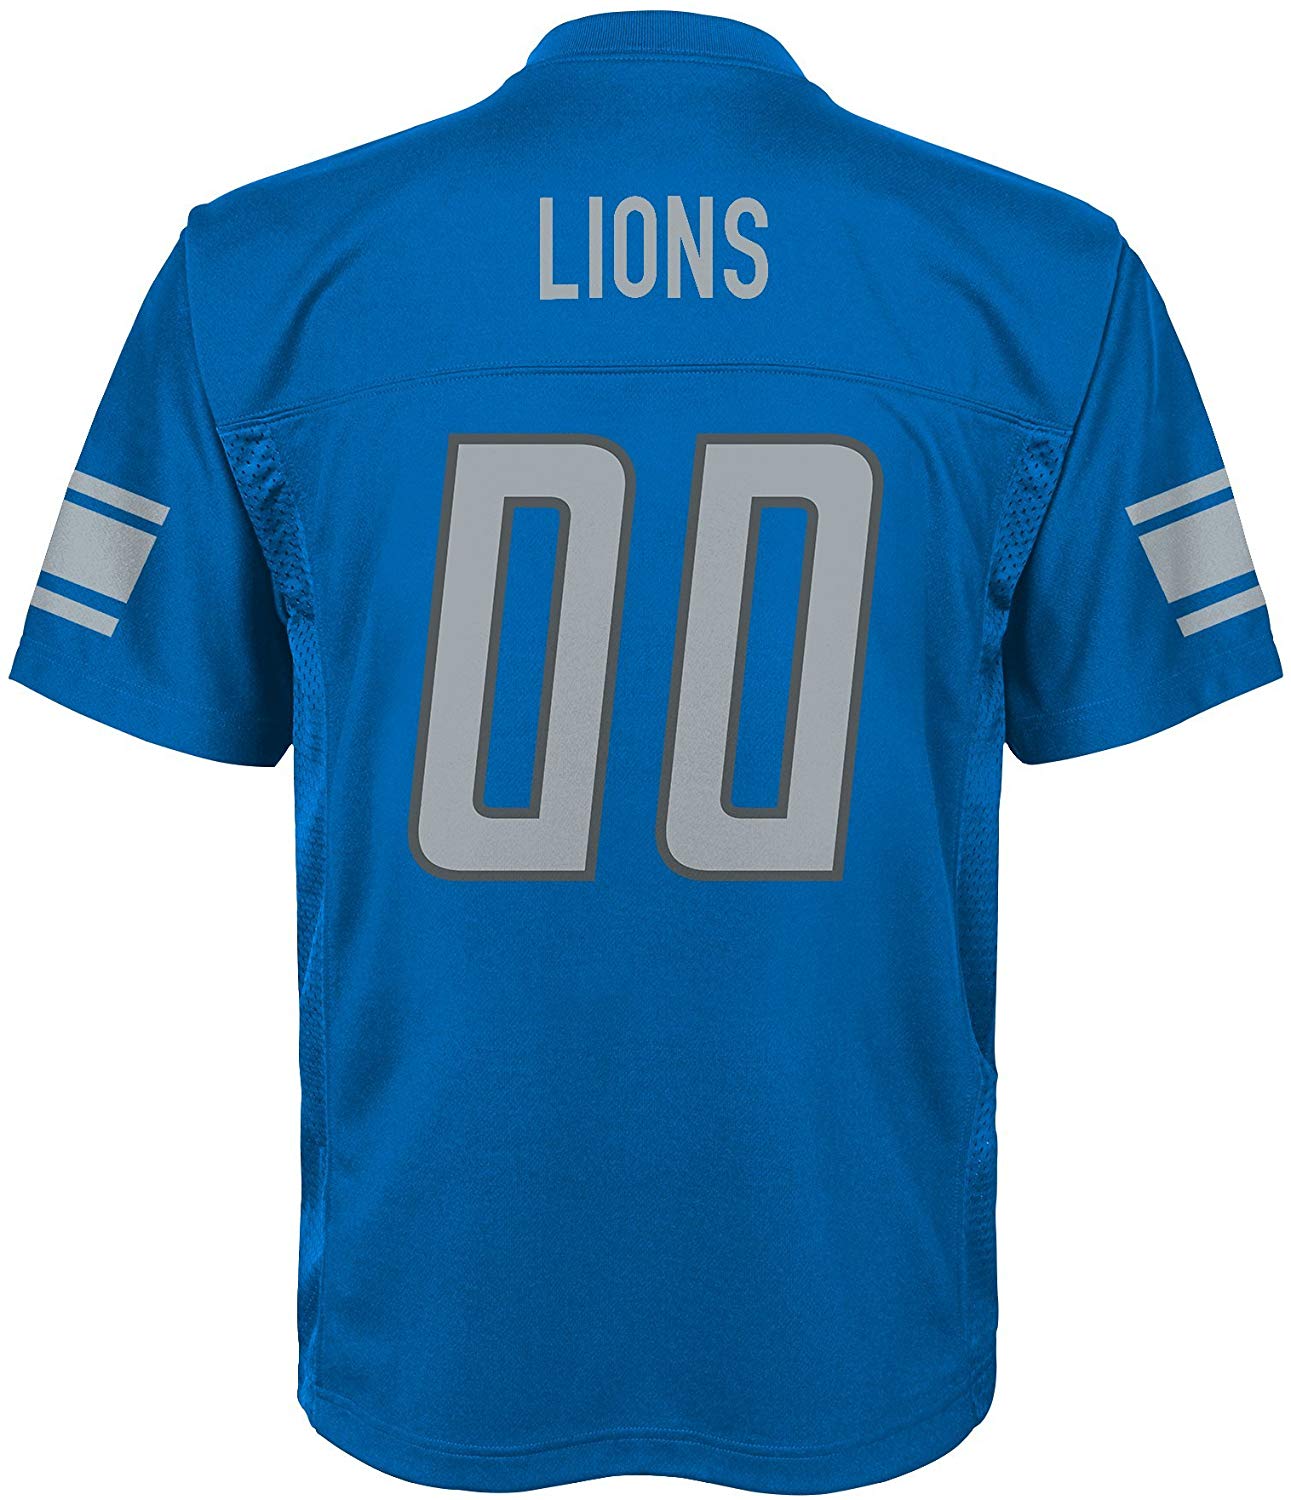 Outerstuff NFL Football Youth Detroit Lions Fashion Jersey eBay